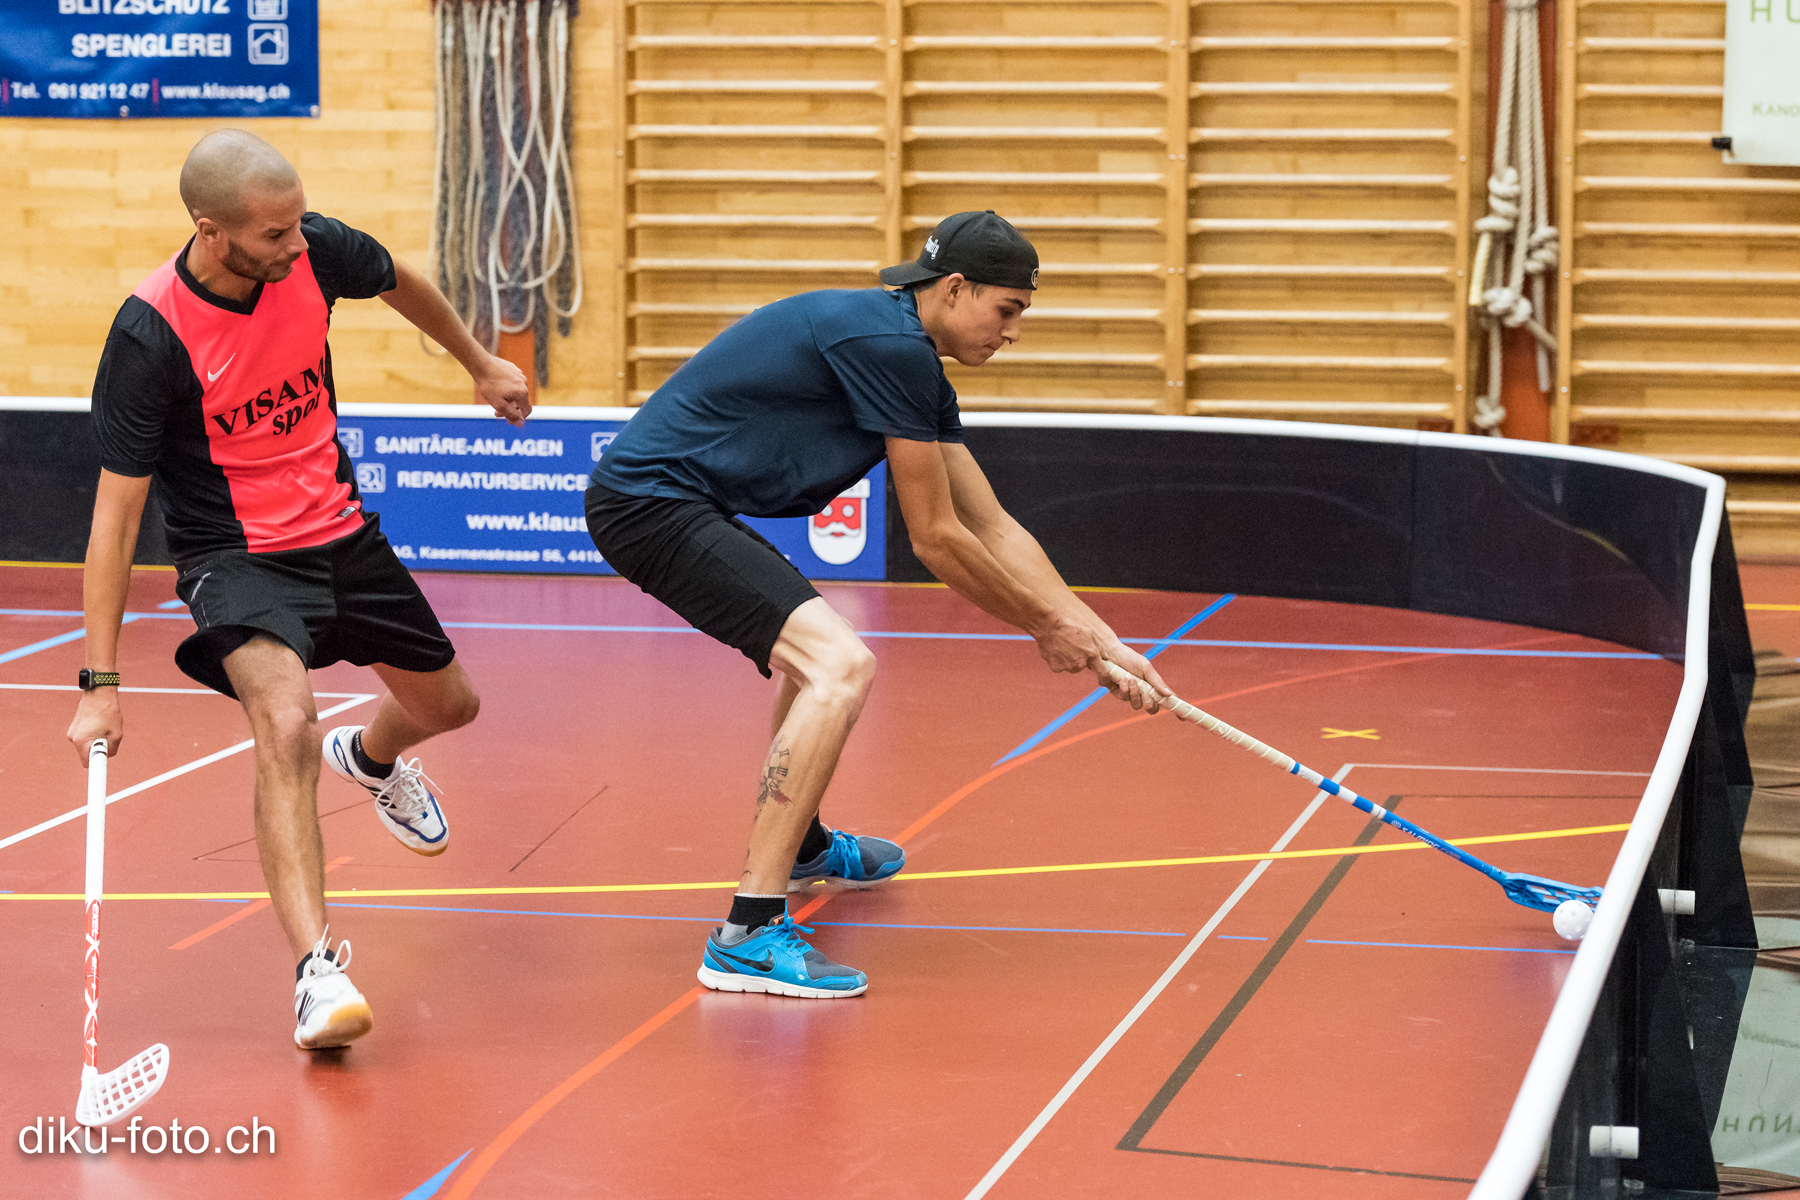 112Floorball Cup 2017 in Sissach